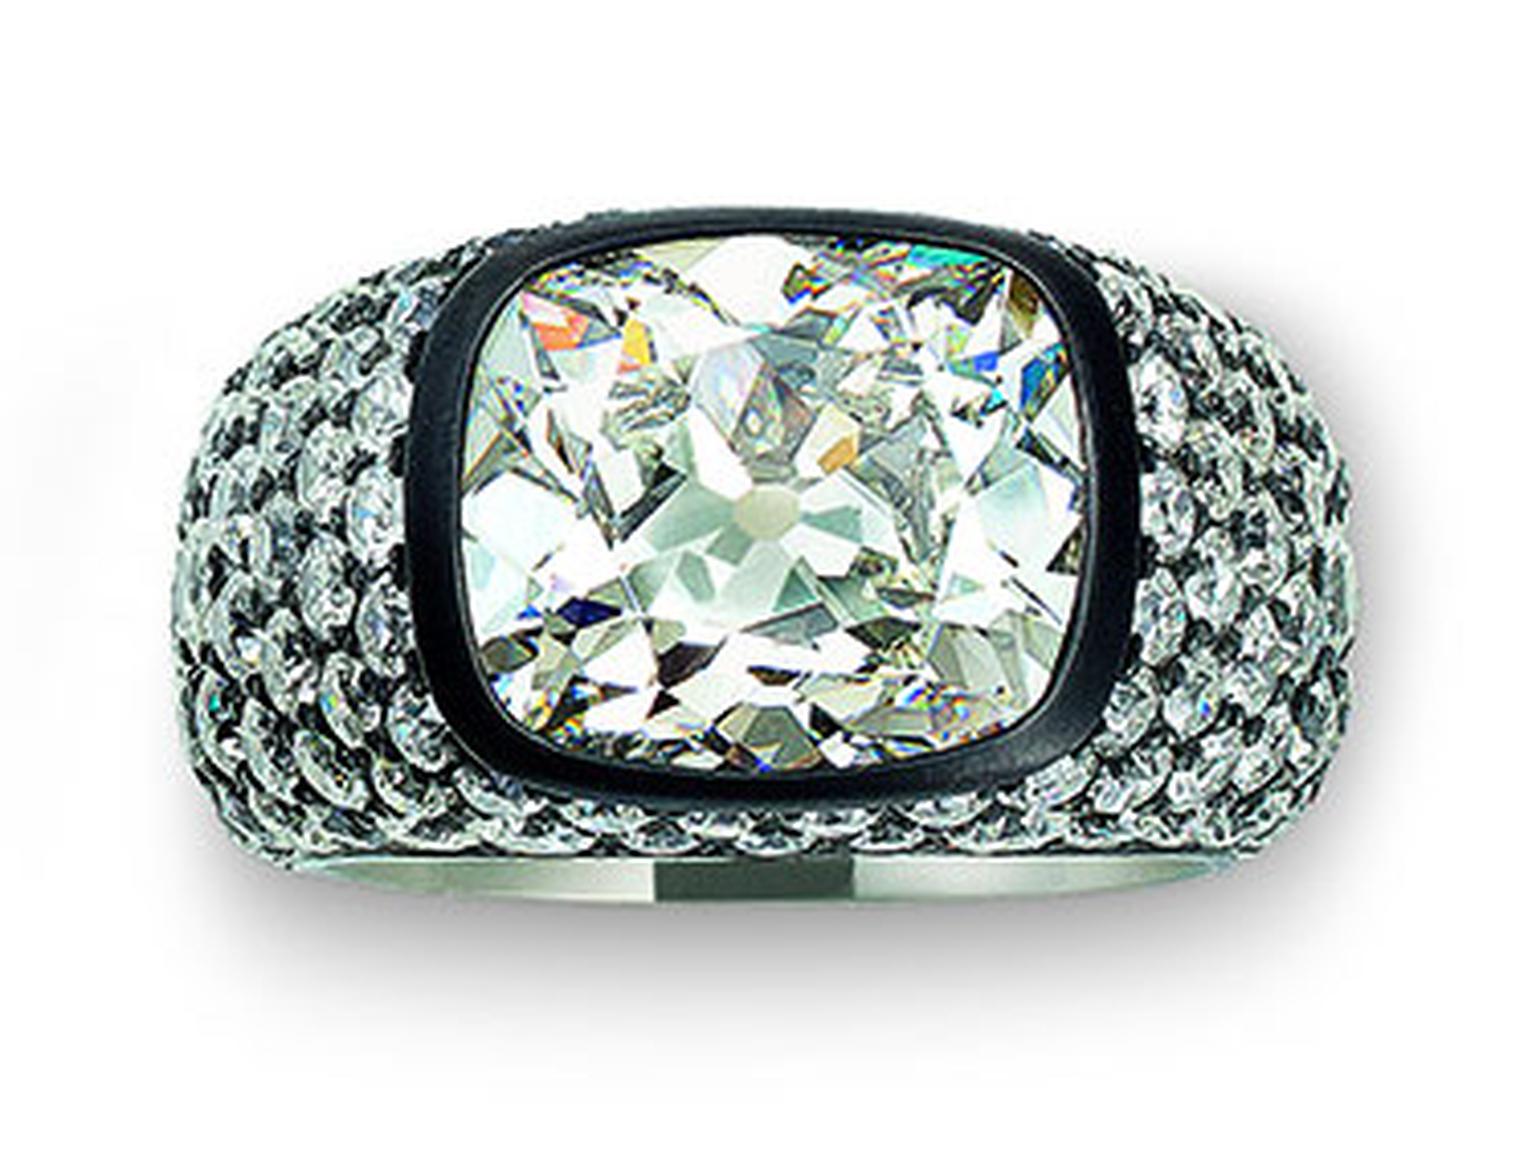 Hemmerle-ring-black-finished-silver-white-gold-diamond-cts-old-cut-diamonds-0119.jpg